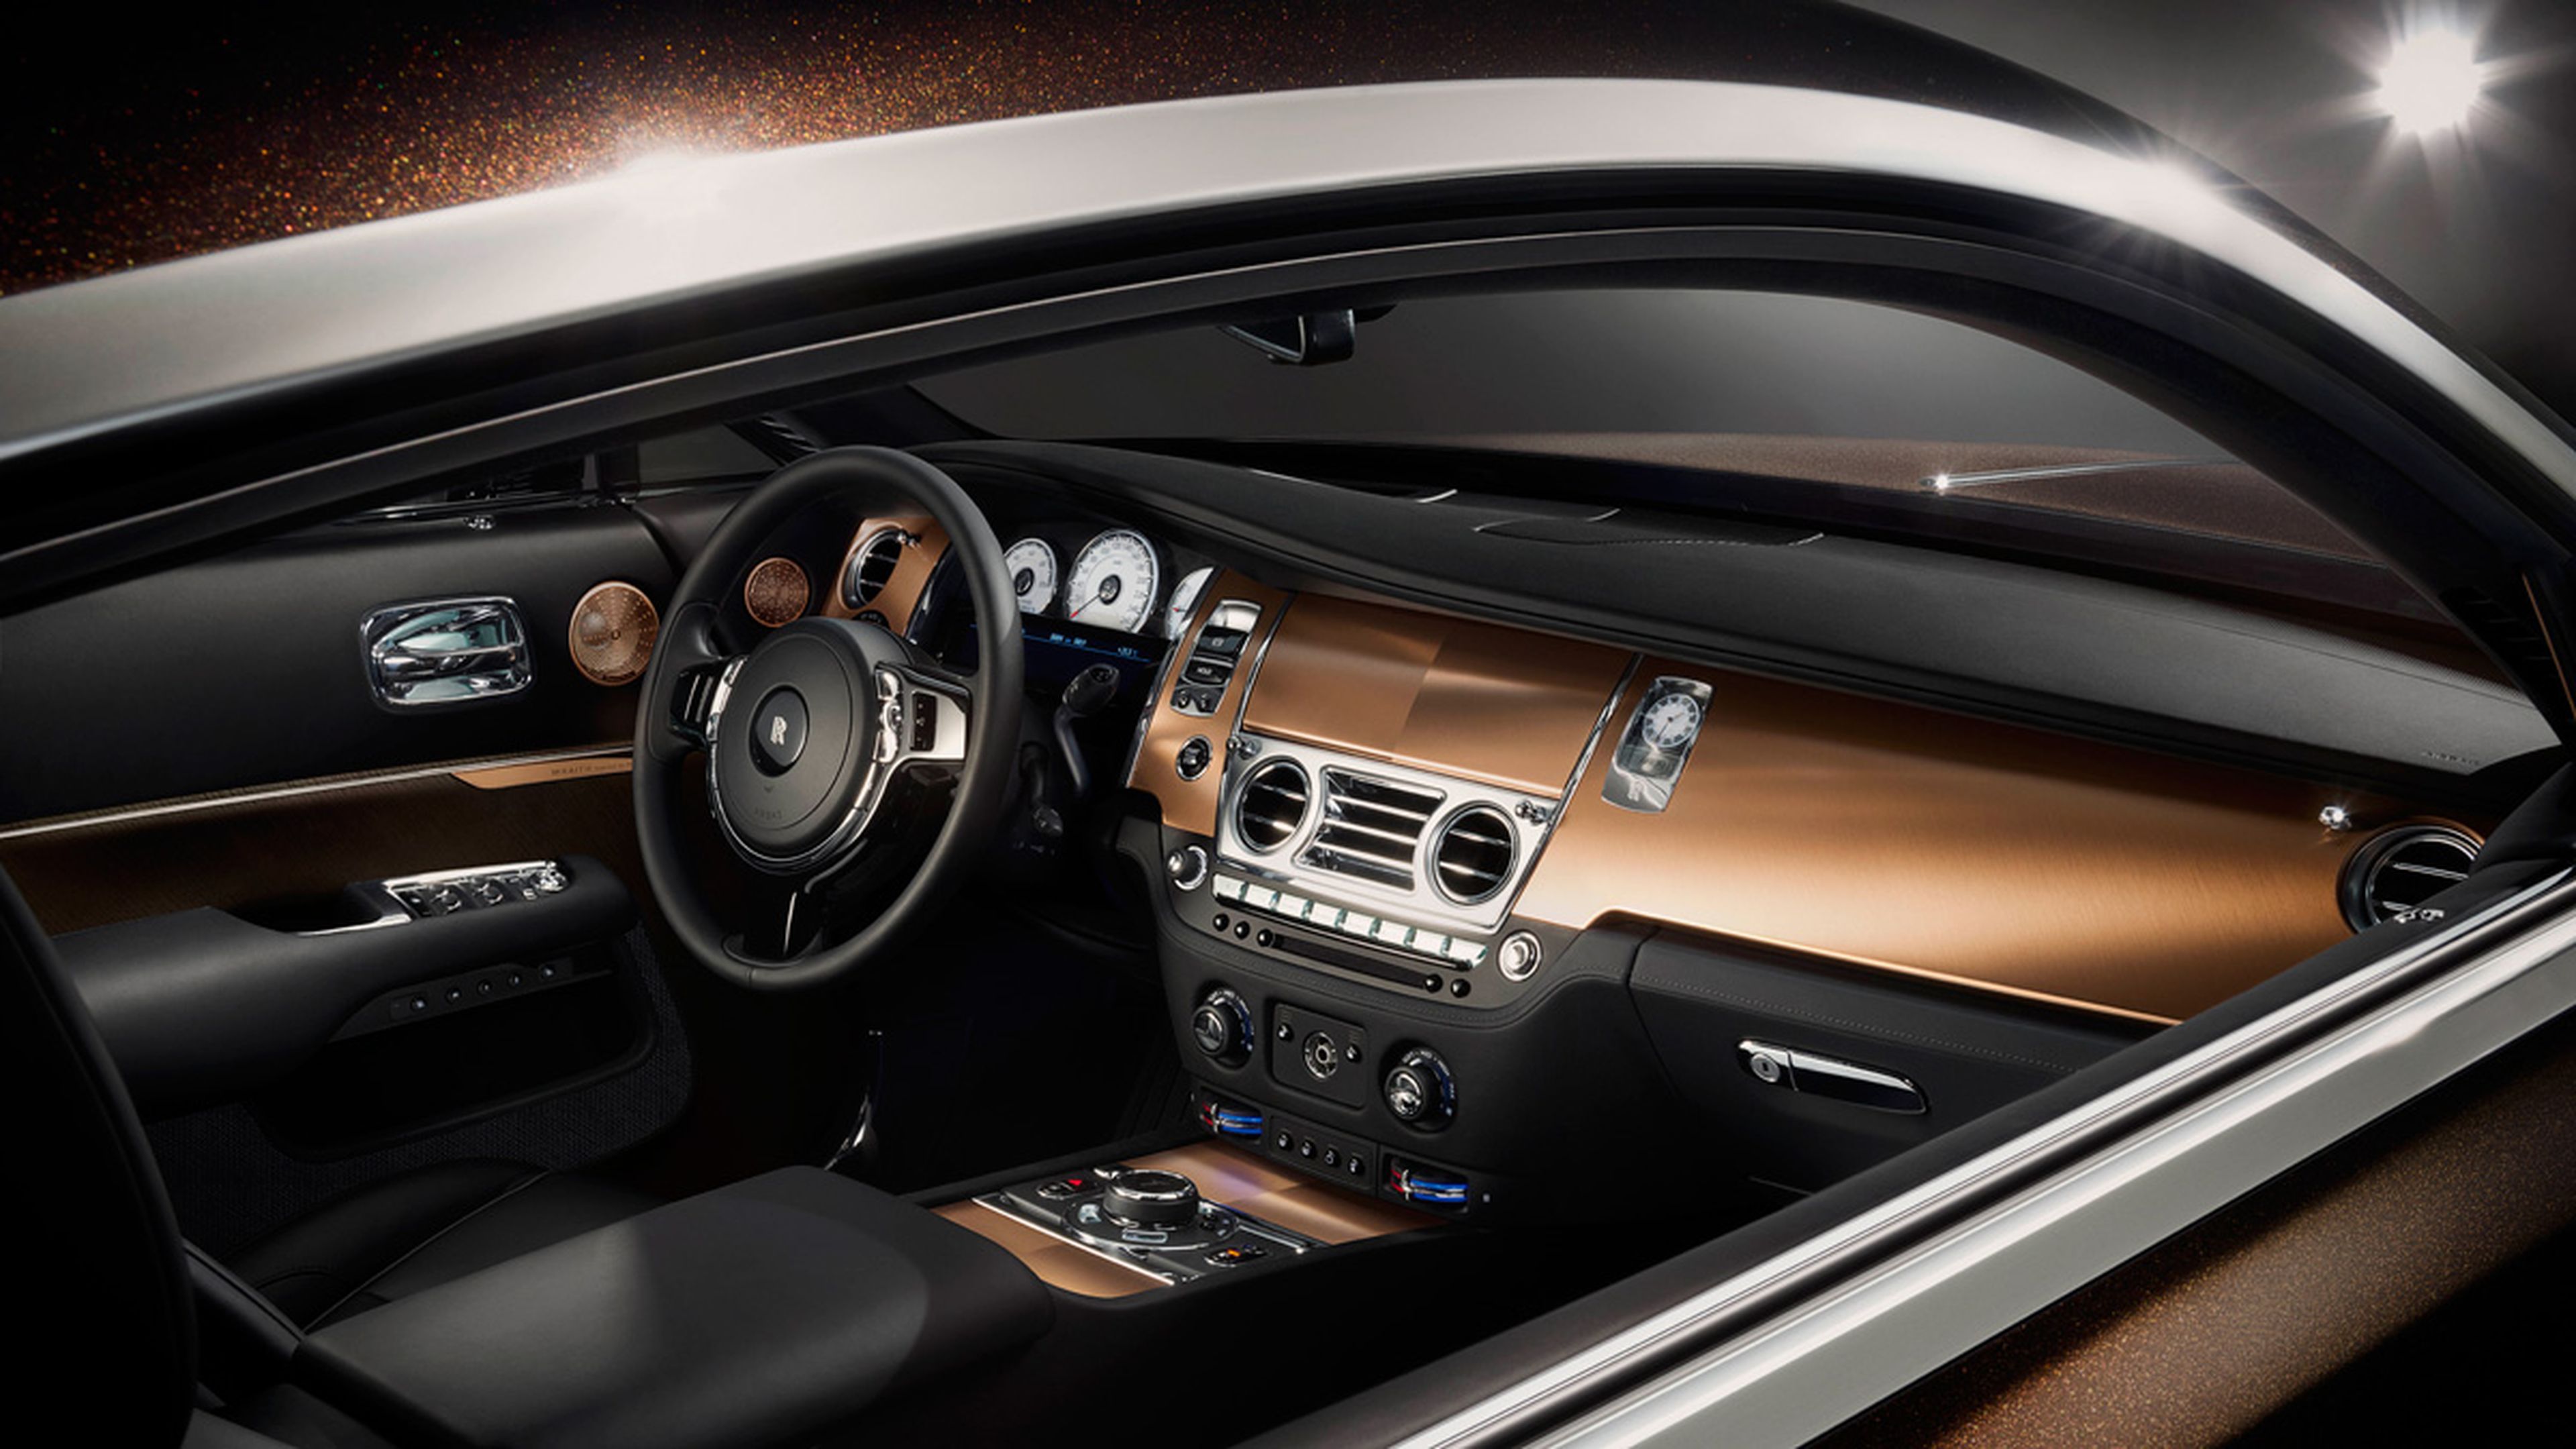 Rolls-Royce inspired by music interior